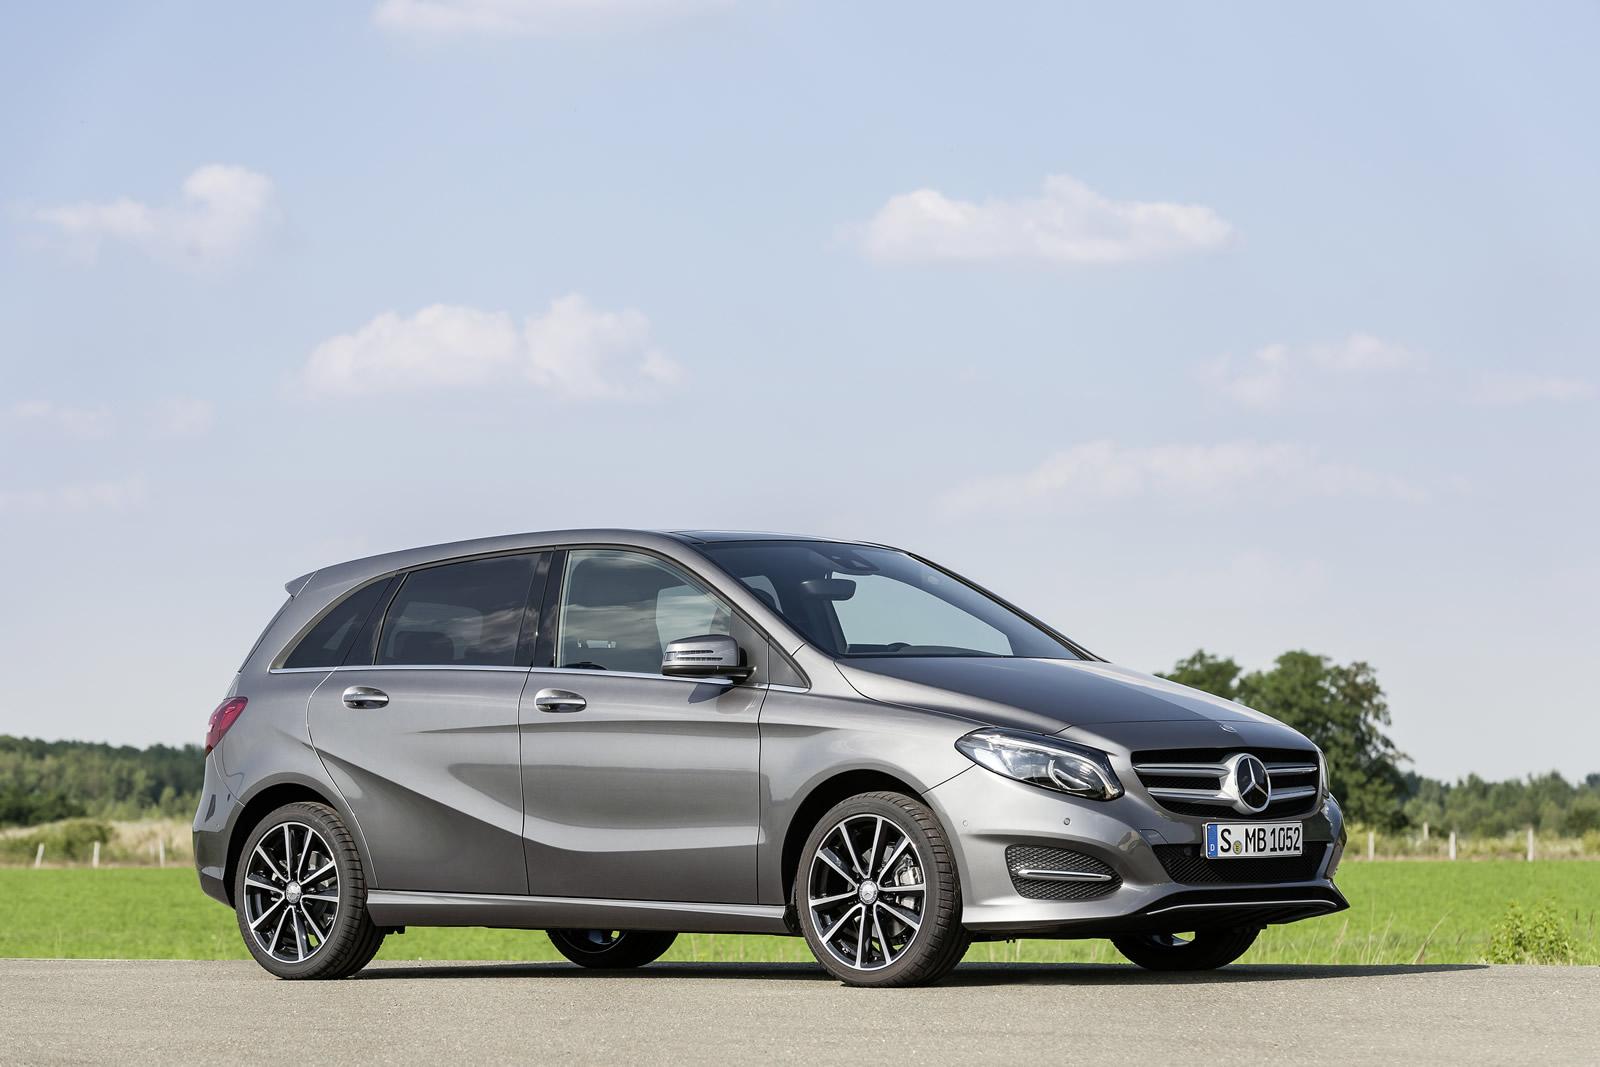 Mercedes Updates the B-Class with LED Headlights and AMG Package